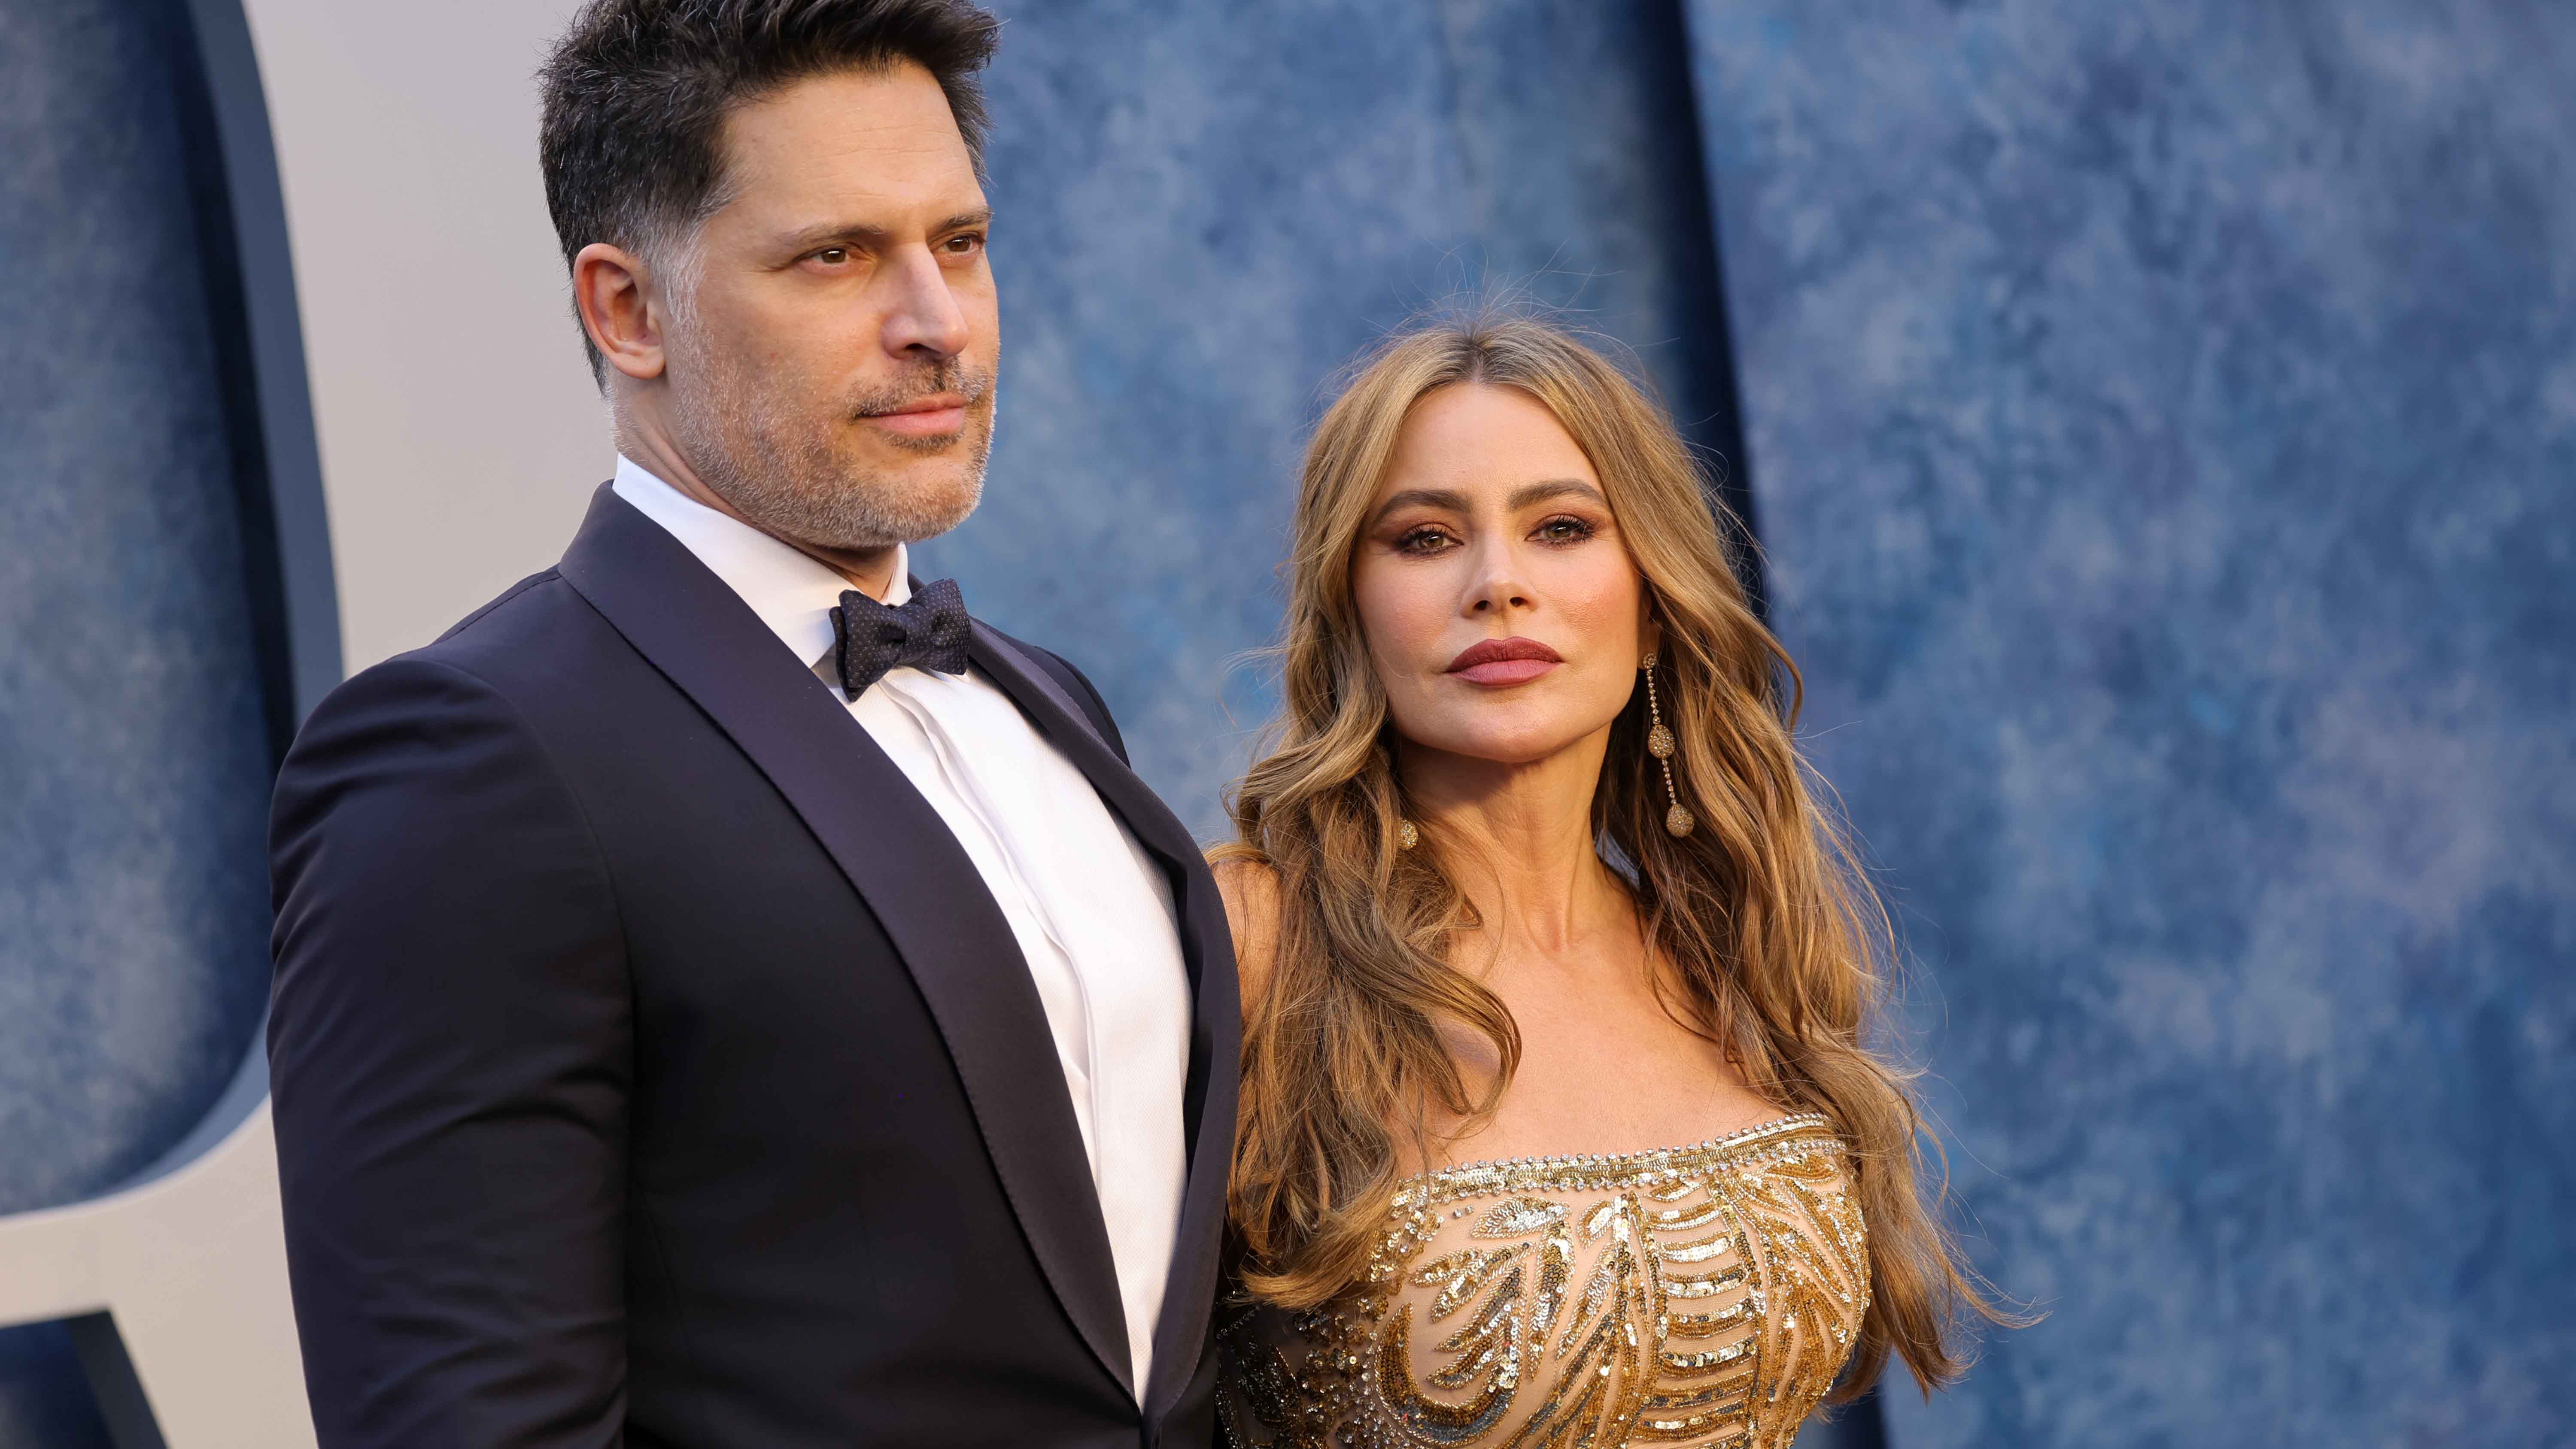 Sofia Vergara Opens Up About 'Difficult' Year Following Divorce